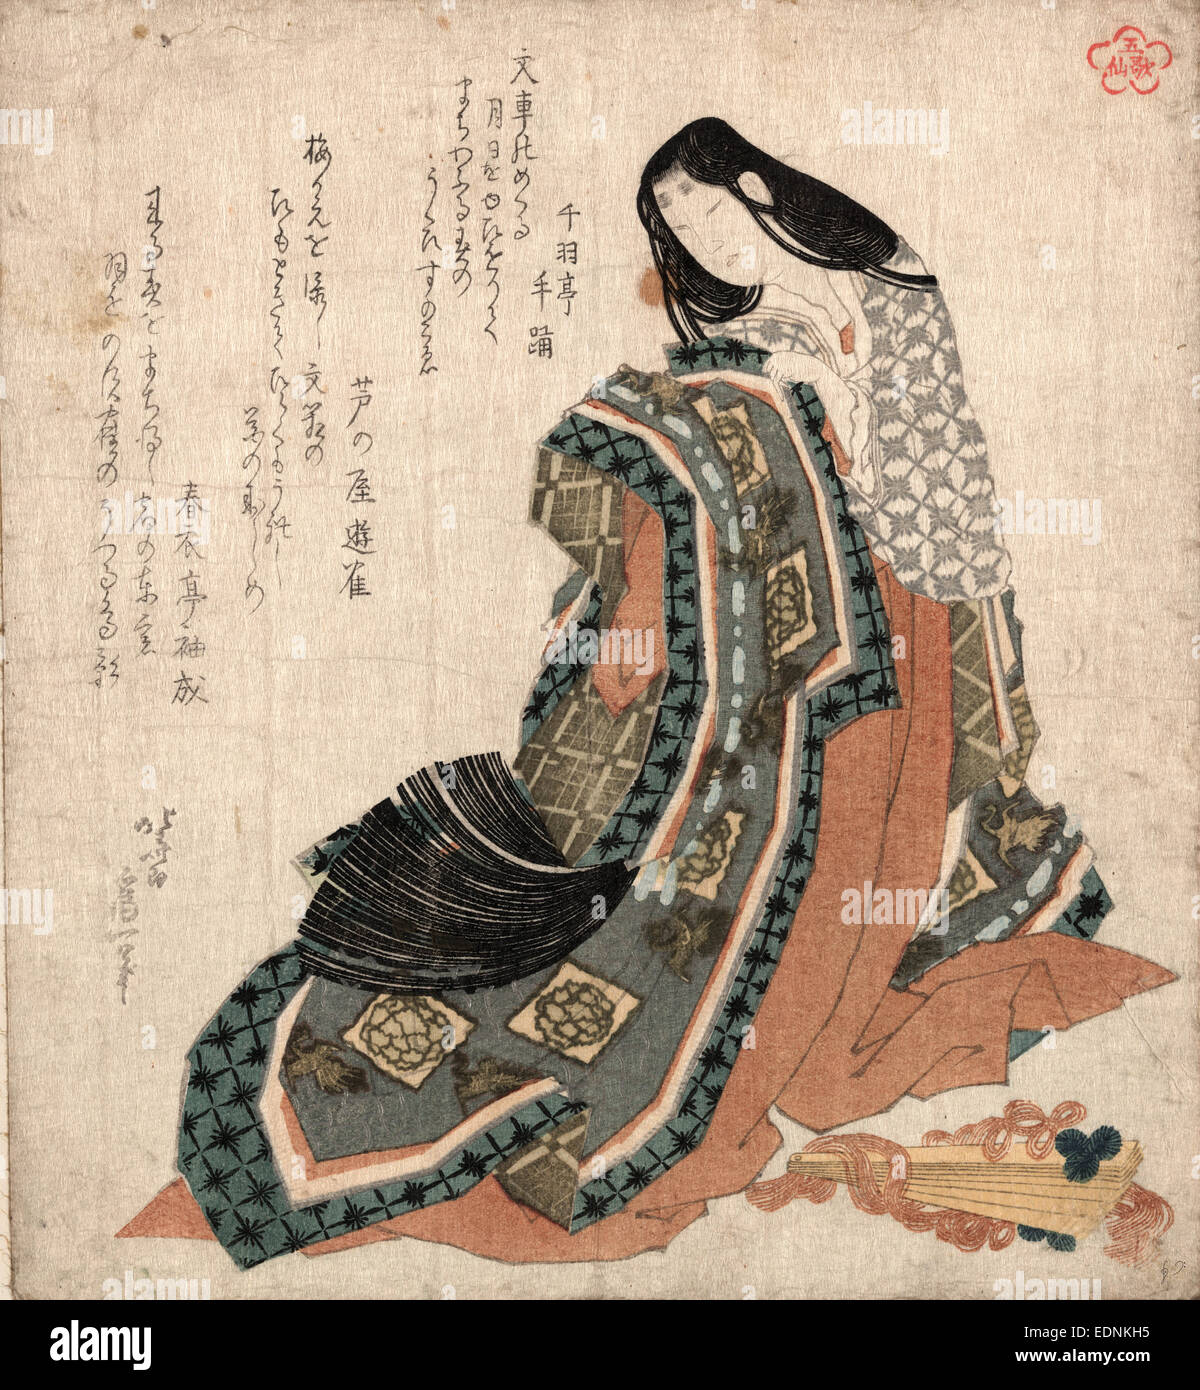 Hiogi, Hiogi: Japanese cypress folding fan., Katsushika, Hokusai, 1760-1849, artist, [between 1820 and 1822], 1 print : woodcut, color ; 20.7 x 18.7 cm., Print shows a woman examining a garment; a wooden fan is on the ground at her feet. Stock Photo